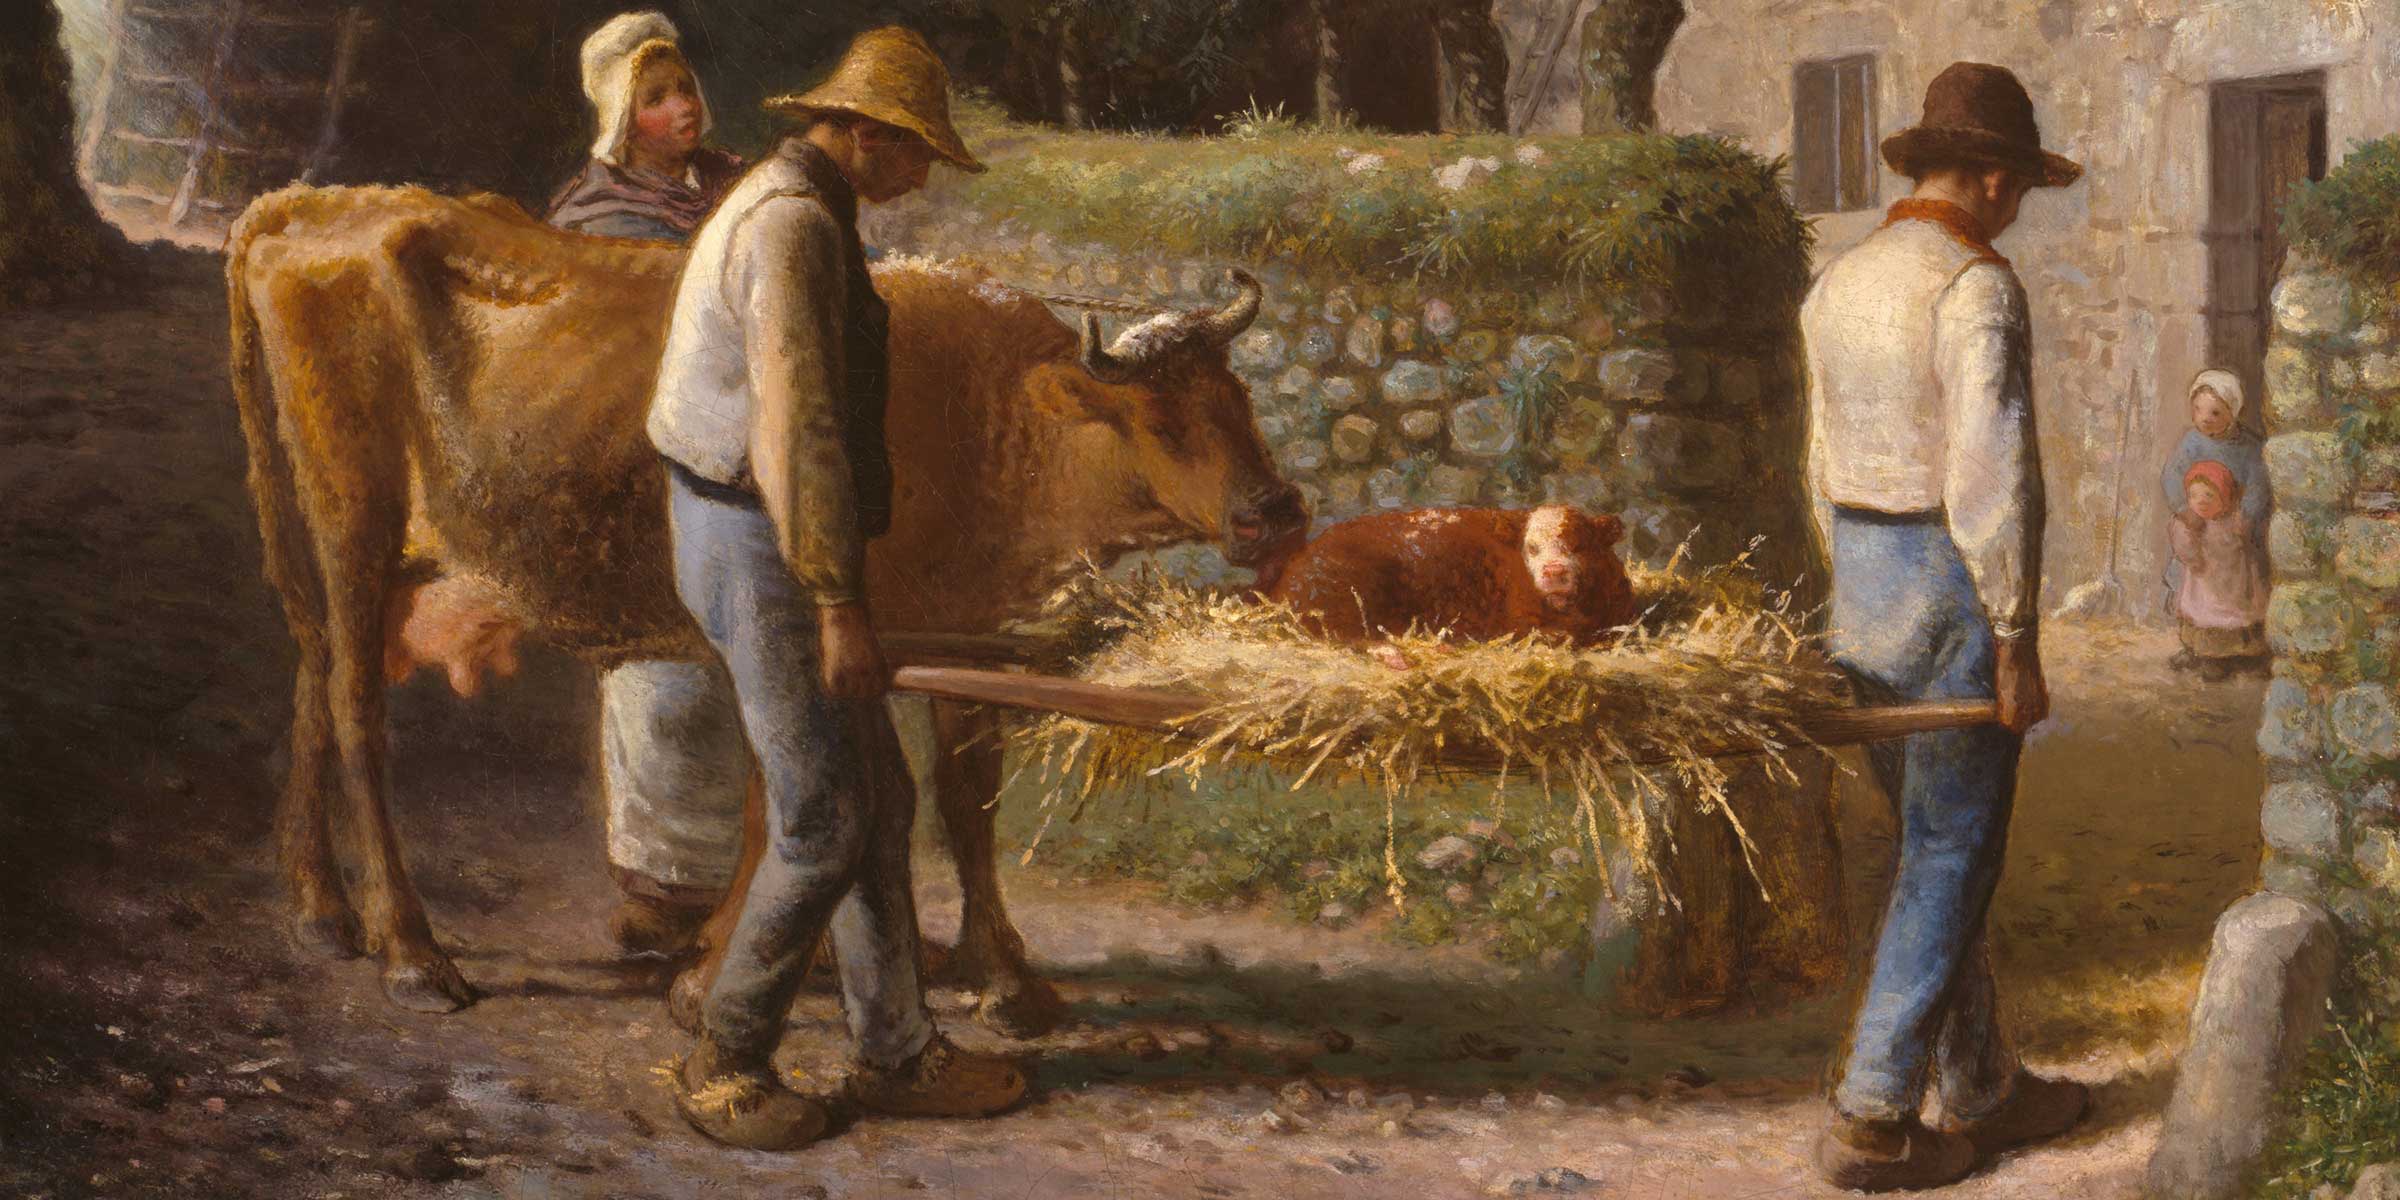 Peasants Bringing Home a Calf Born in the Fields (detail), by Jean-François Millet, 1864.